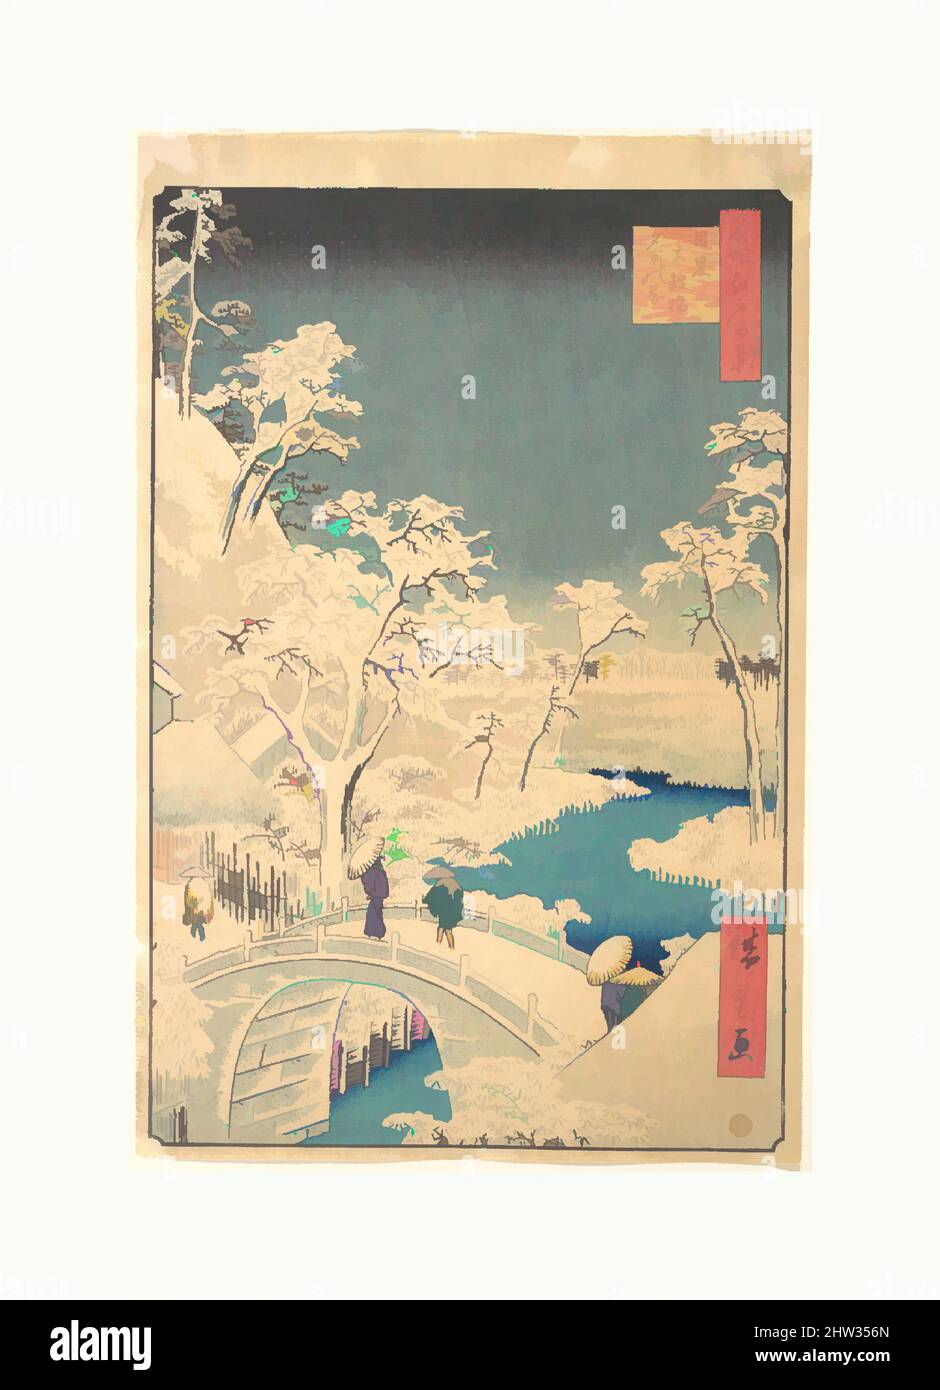 Art inspired by 名所江戶百景　目黒太鼓橋夕ひの岡, Taiko Bridge, Meguro, on a Snowy Evening, Edo period (1615–1868), 4th month snake year 1857, Japan, Polychrome woodblock print; ink and color on paper, 14 1/4 x 9 1/4 in. (36.2 x 23.5 cm), Prints, Utagawa Hiroshige (Japanese, Tokyo (Edo) 1797–1858, Classic works modernized by Artotop with a splash of modernity. Shapes, color and value, eye-catching visual impact on art. Emotions through freedom of artworks in a contemporary way. A timeless message pursuing a wildly creative new direction. Artists turning to the digital medium and creating the Artotop NFT Stock Photo